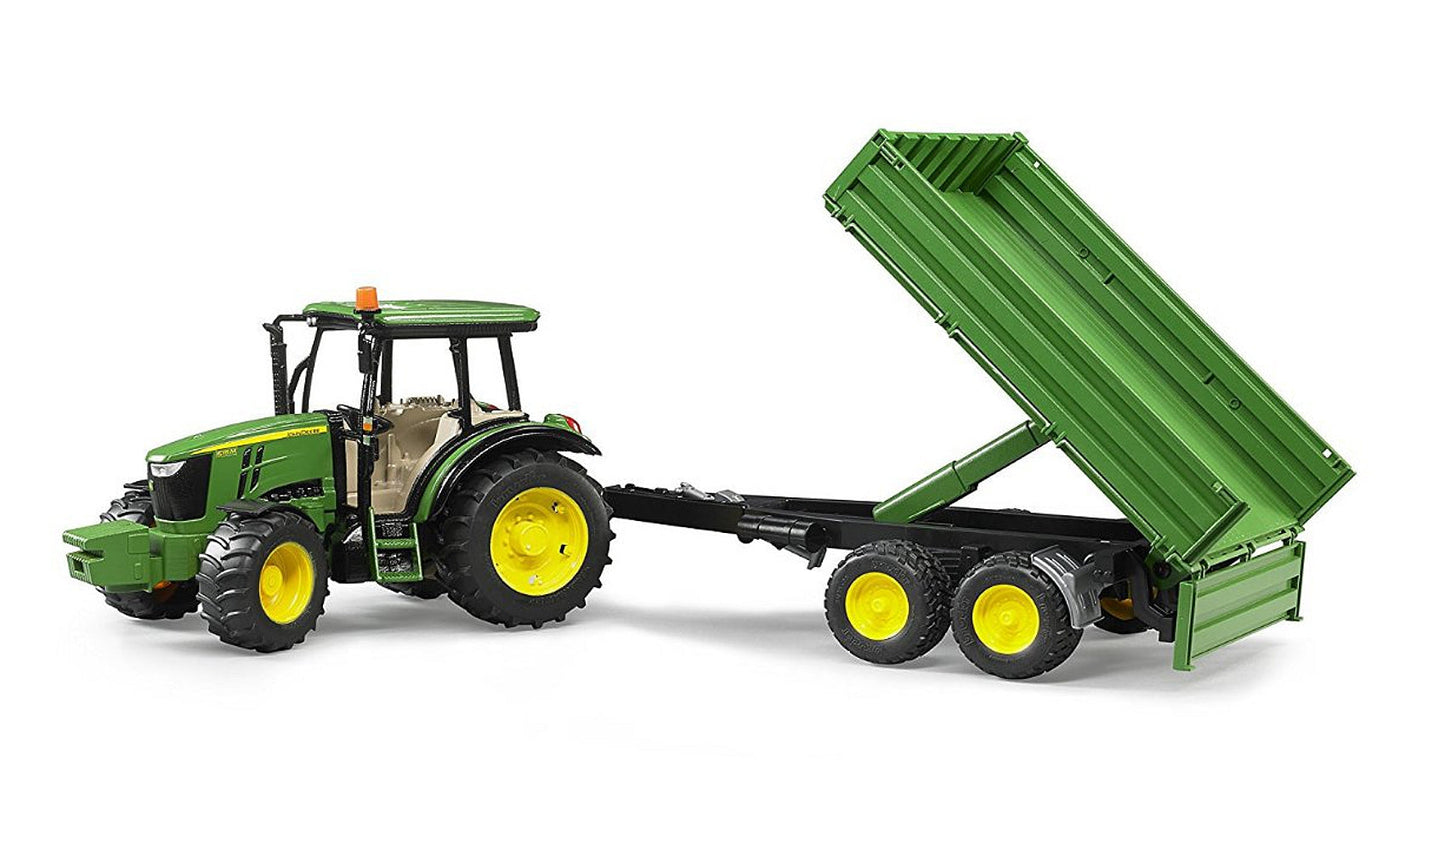 John Deere 5115M Tractor Toy with Tilting Trailer by Bruder - LP65044